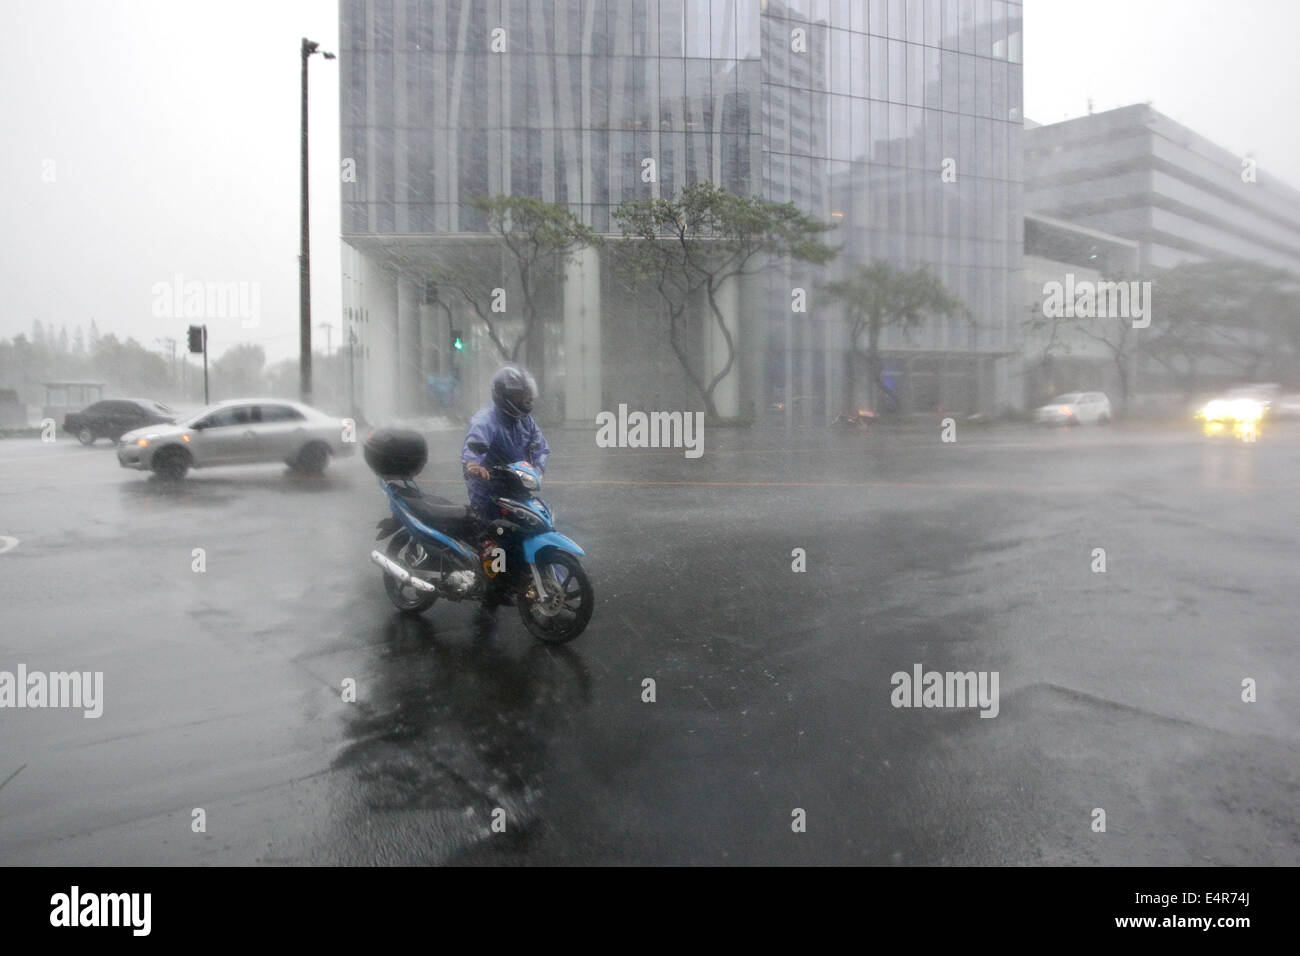 Manila, Philippines. 16th July, 2014. A man attempts to gain control of his motorcycle as Typhoon Rammasun hit Metro Manila. Typhoon Rammasun (locally known as Glenda) had maximum sustained winds of 150 kph and gustiness of up to 185 kph when it hit Metro Manila. Across the country, about 400,000 people had fled their homes and sheltered in evacuation centers, according to the disaster management council. © PACIFIC PRESS/Alamy Live News Stock Photo